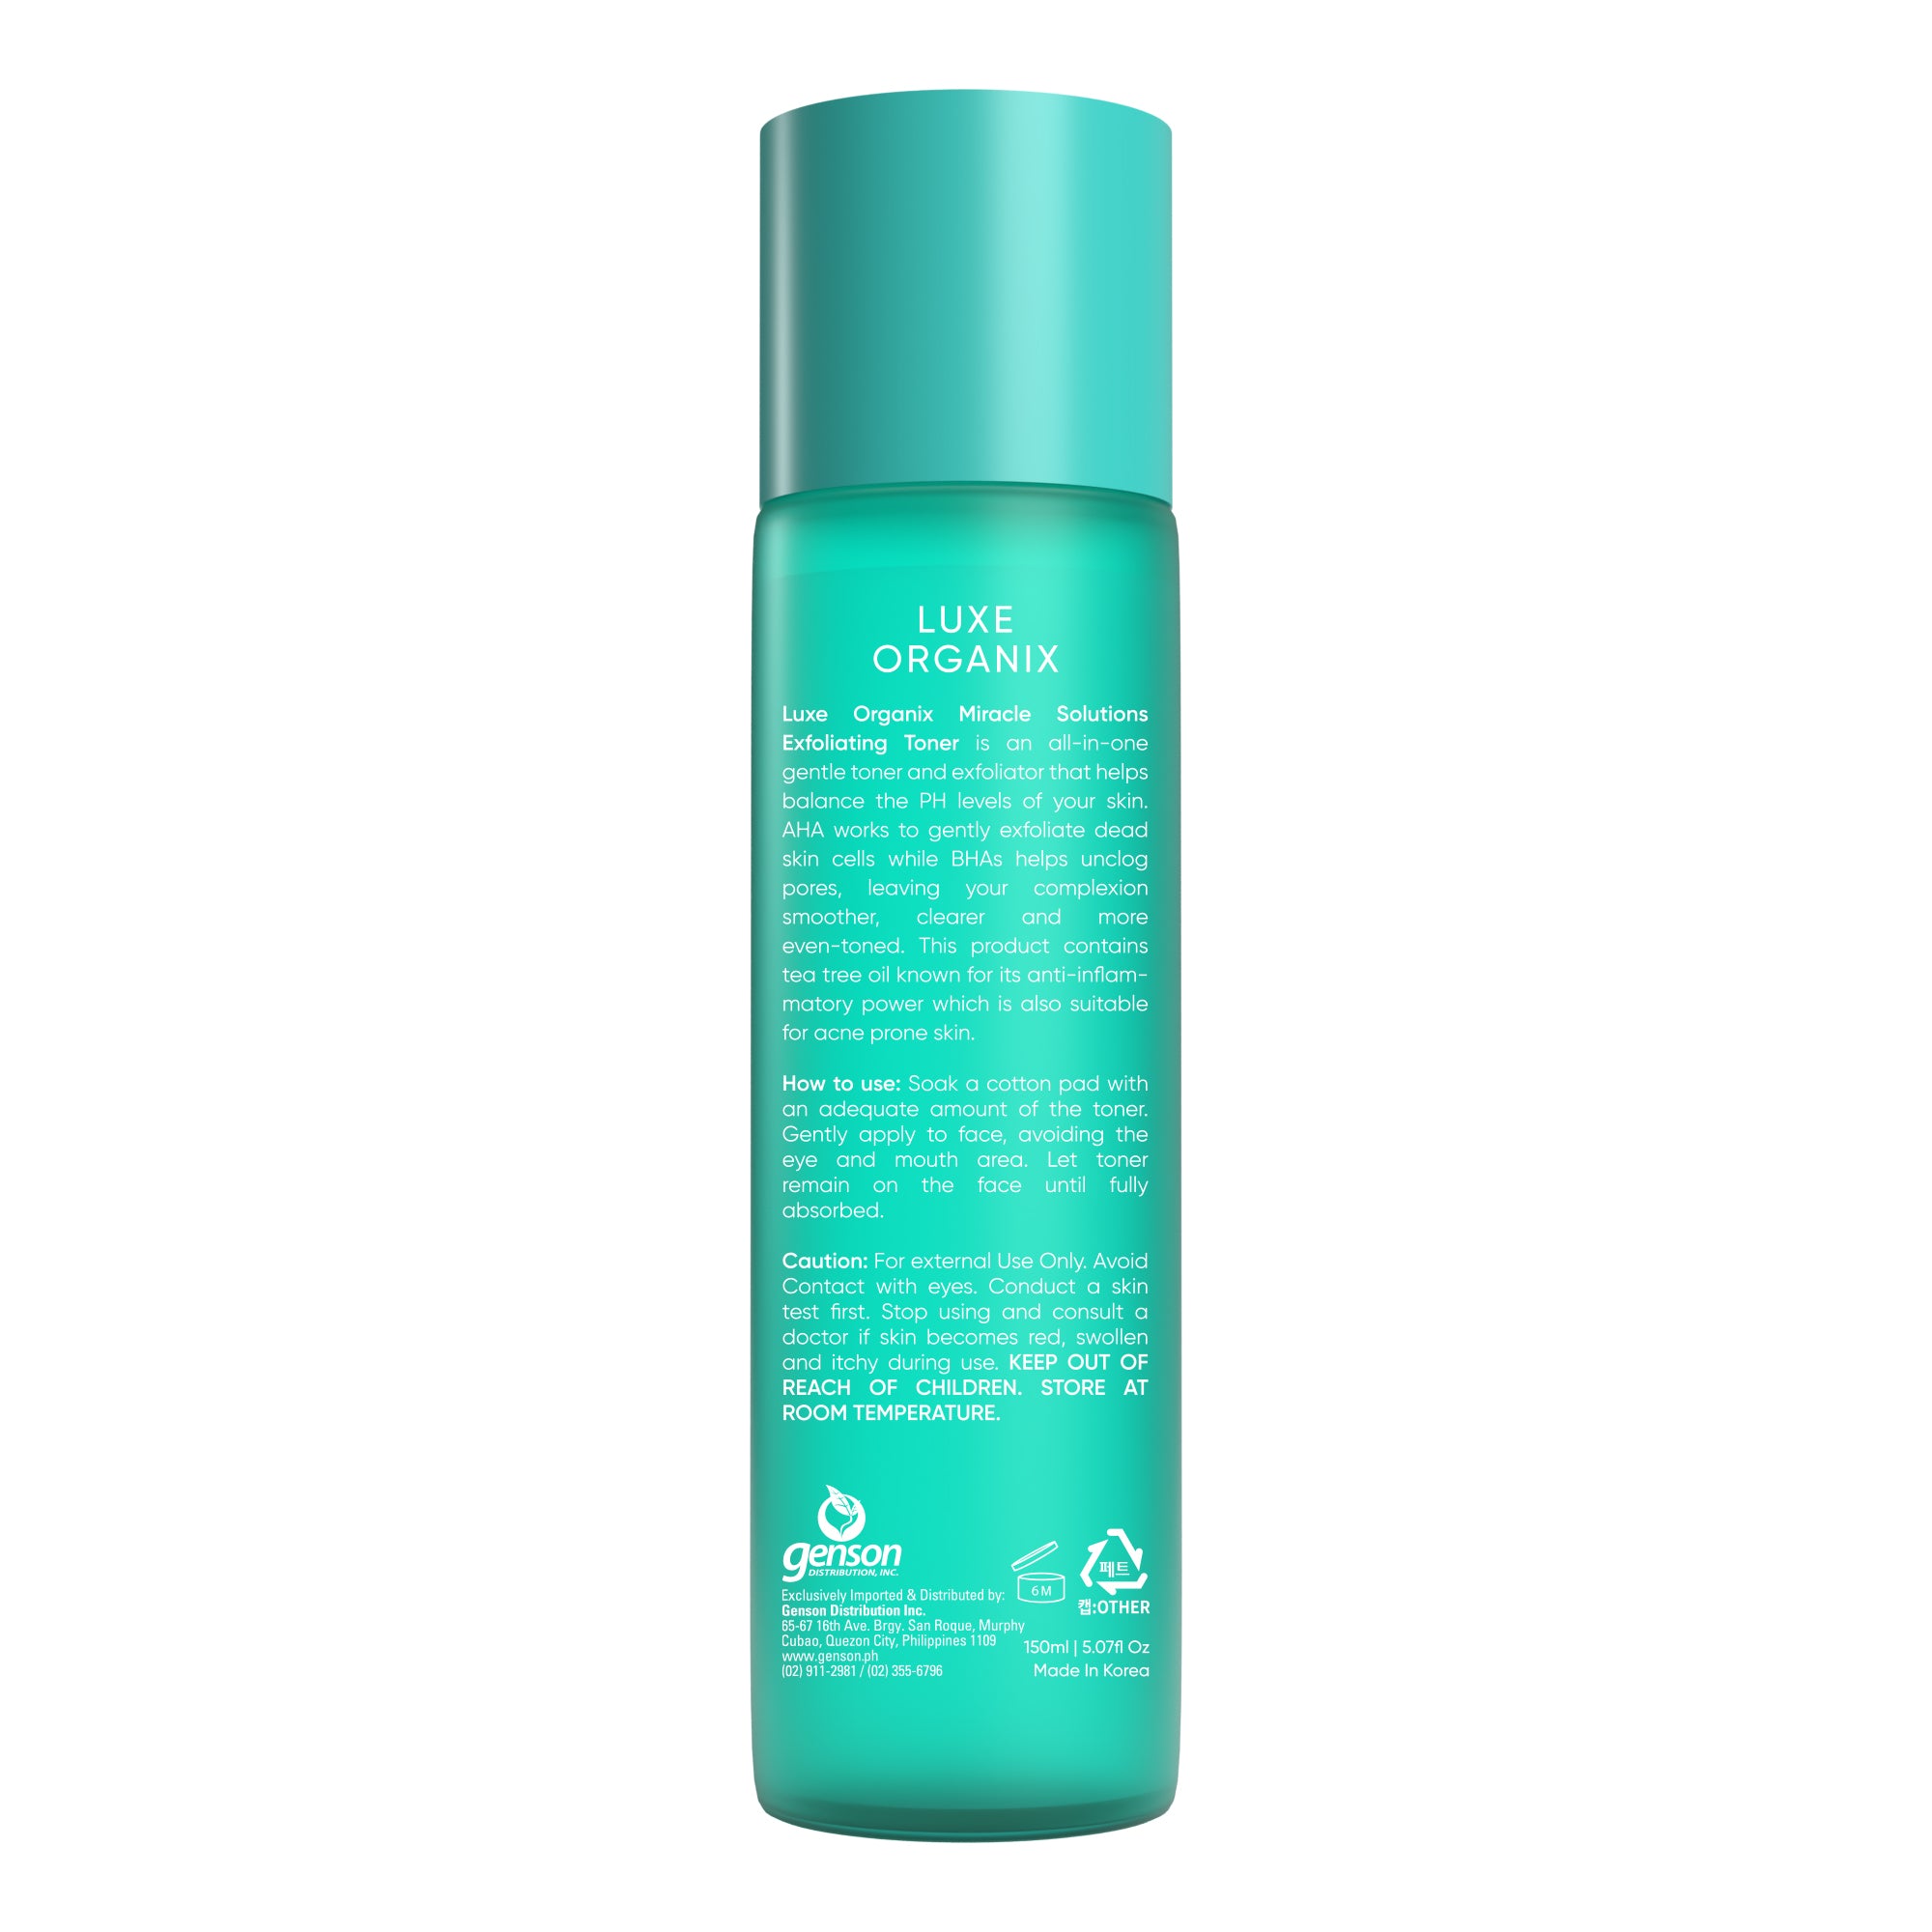 Miracle Solutions Exfoliating Toner 150ml